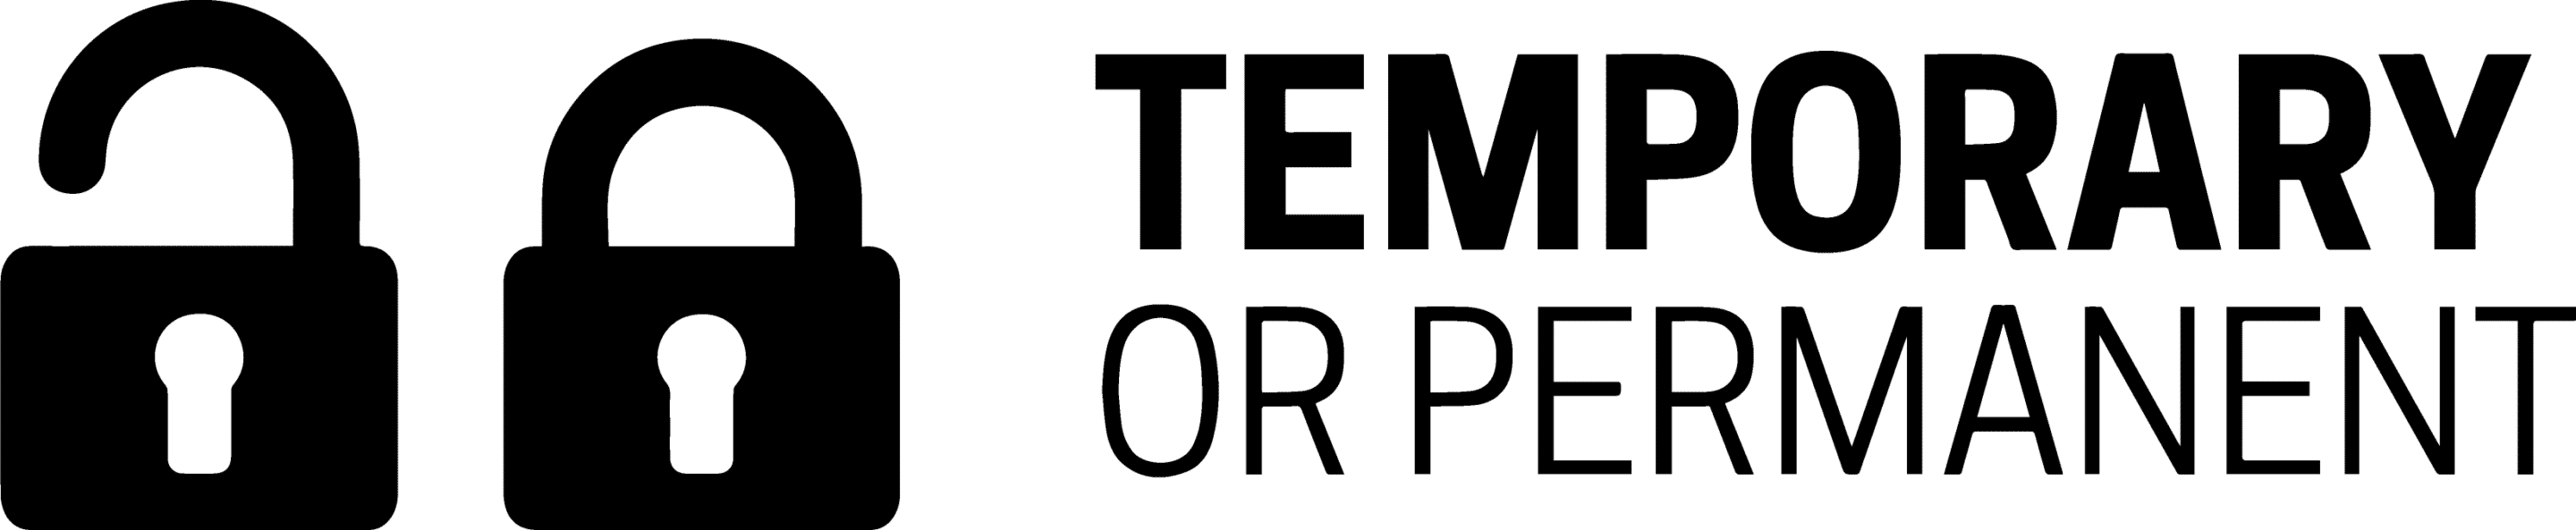 Temporary Or Permanent